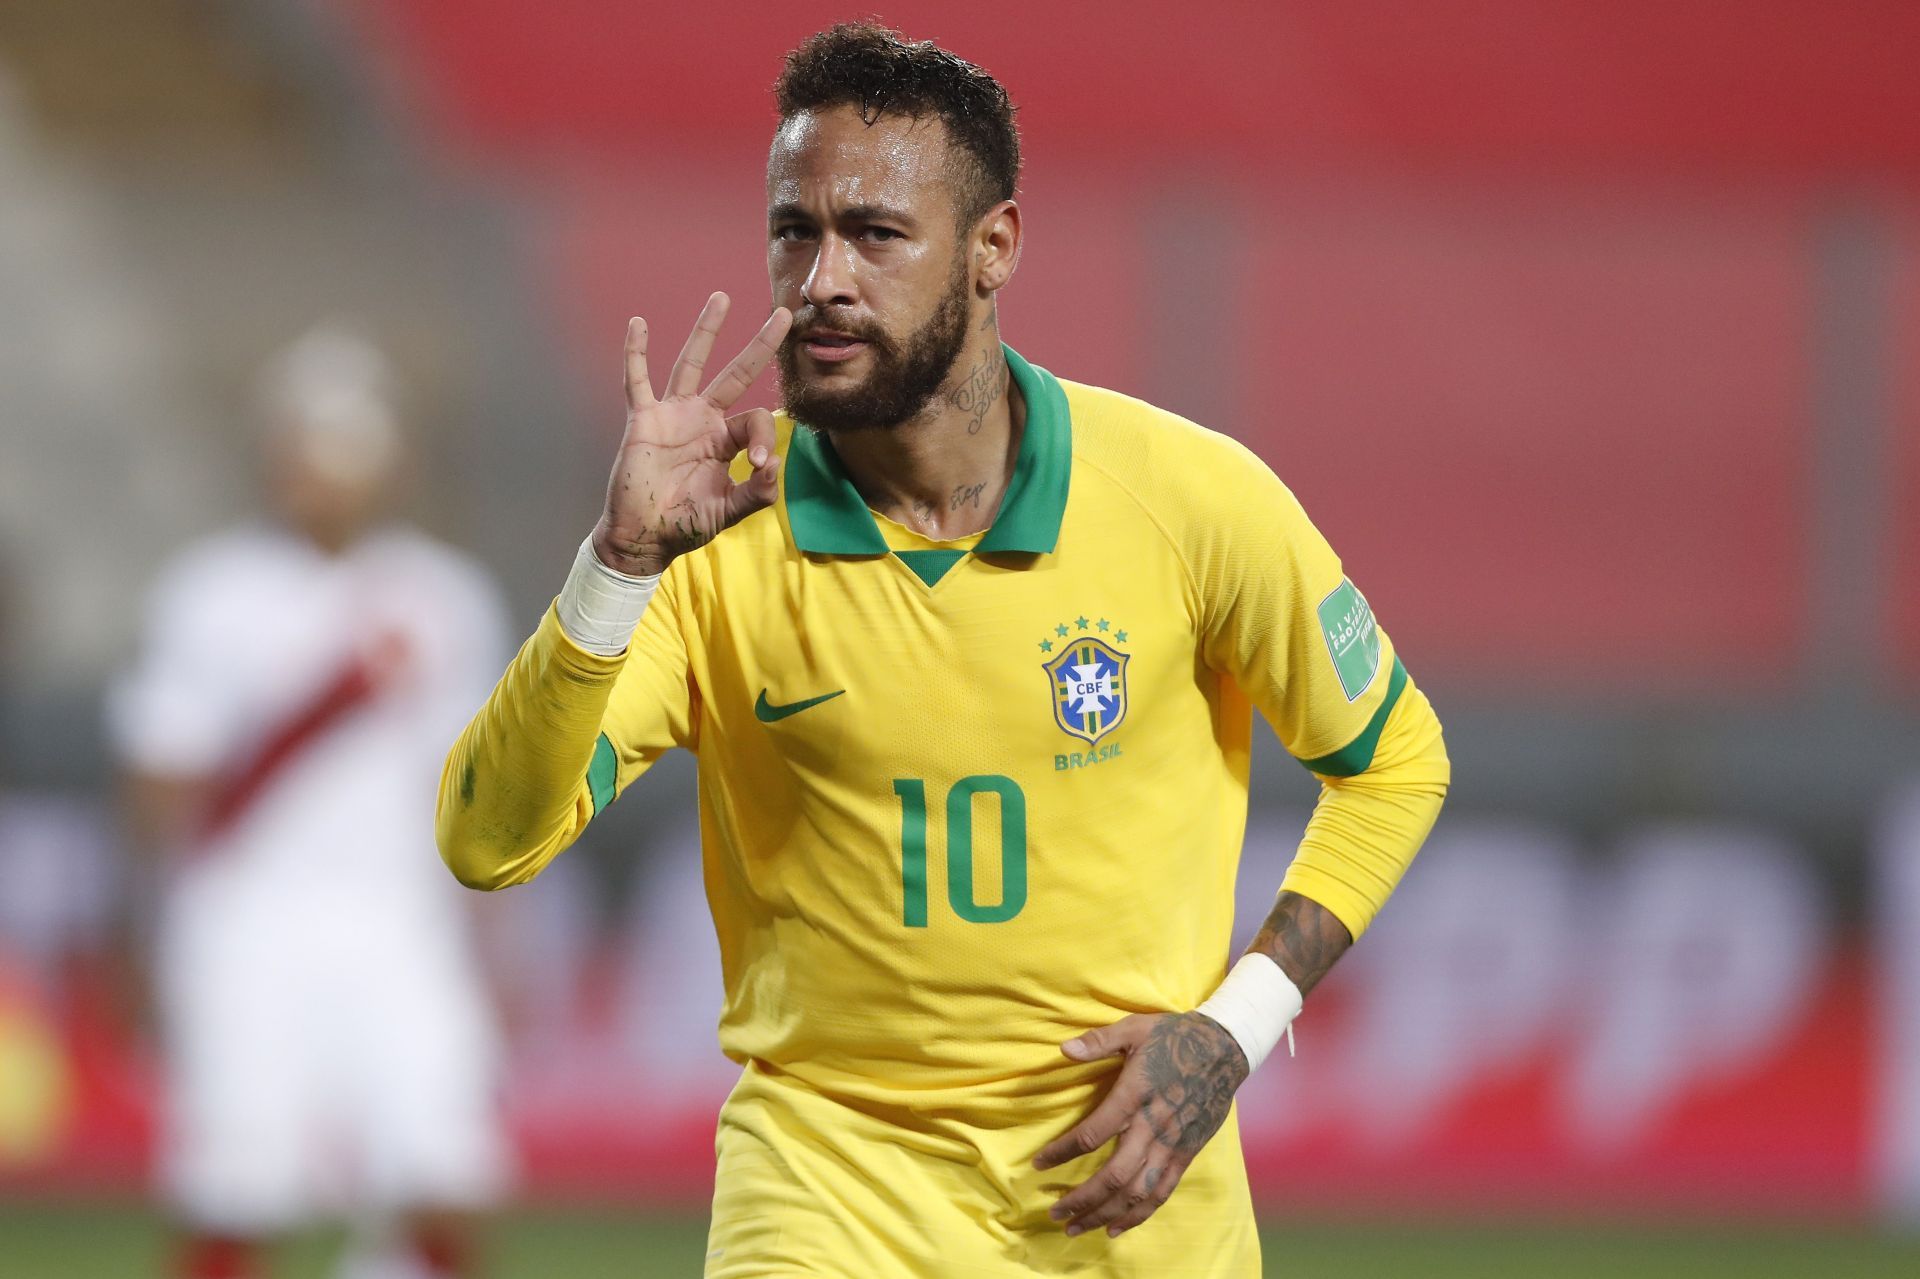 Neymar has been phenomenal for both club and country